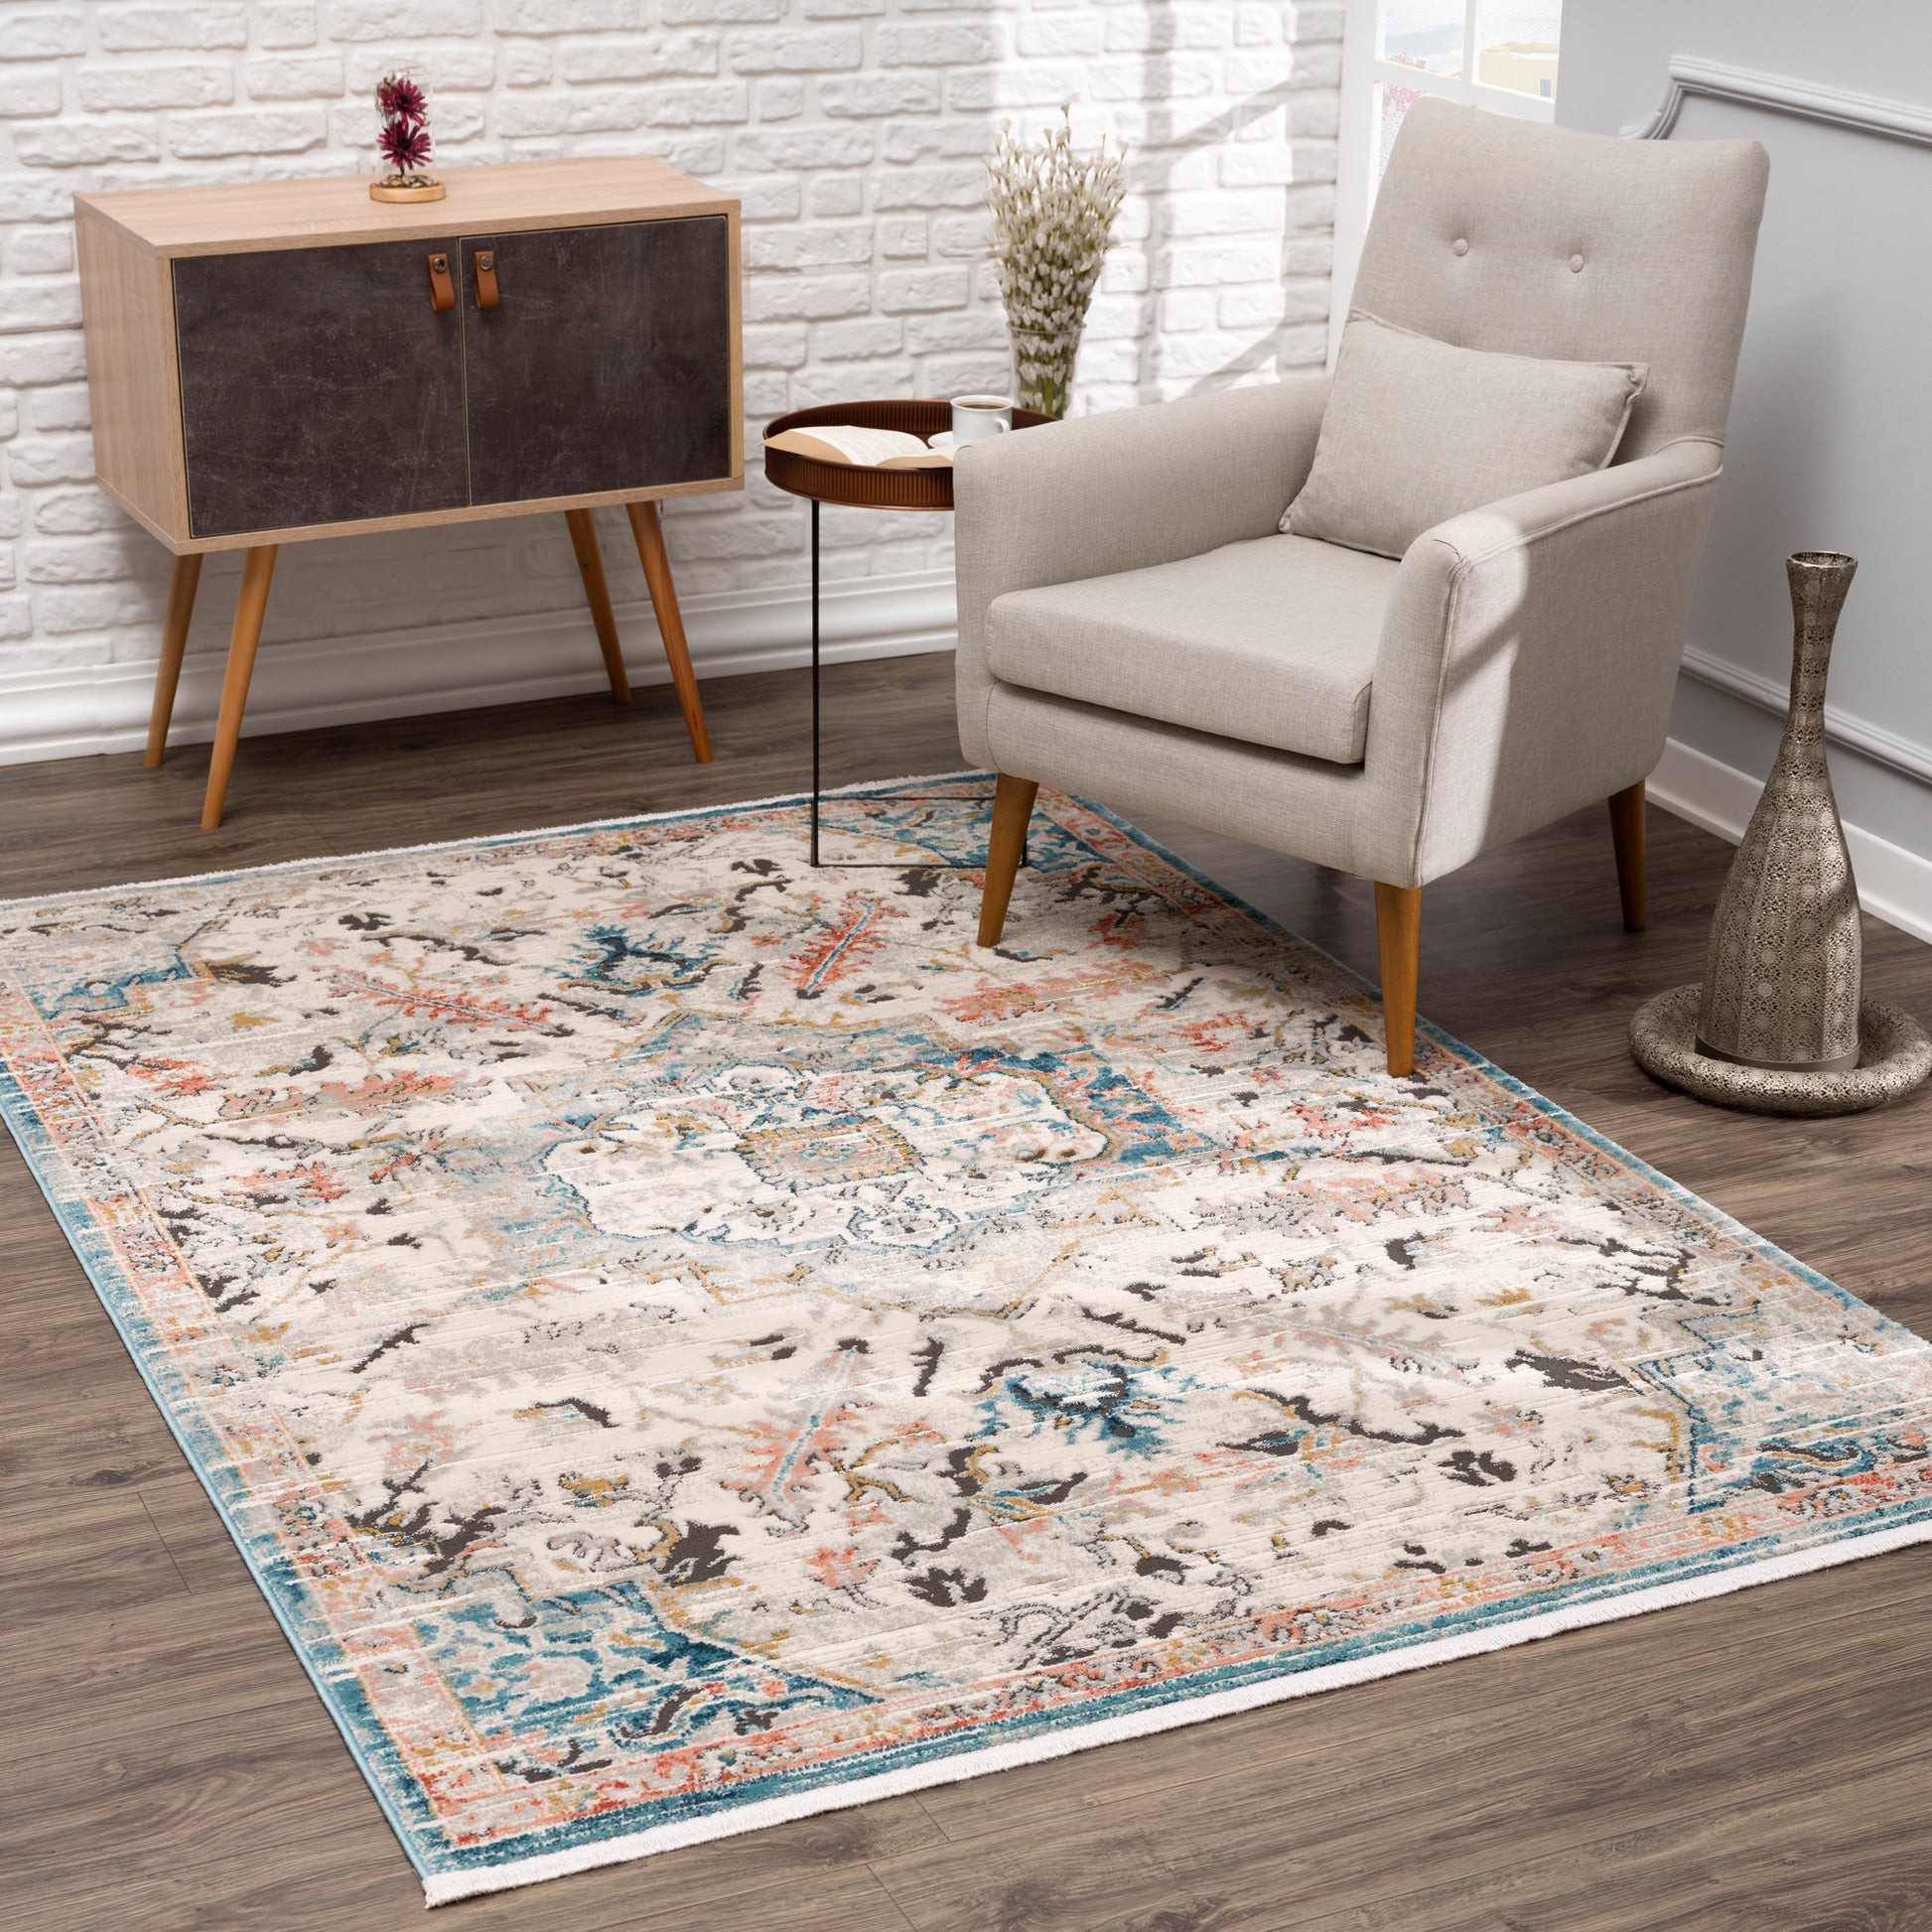 la dole rugs traditional persian oriental distressed teal turquoise ivory grey red orange area rug 5x7, 5x8 ft Contemporary, Living Room Carpet, Bedroom, Home Office